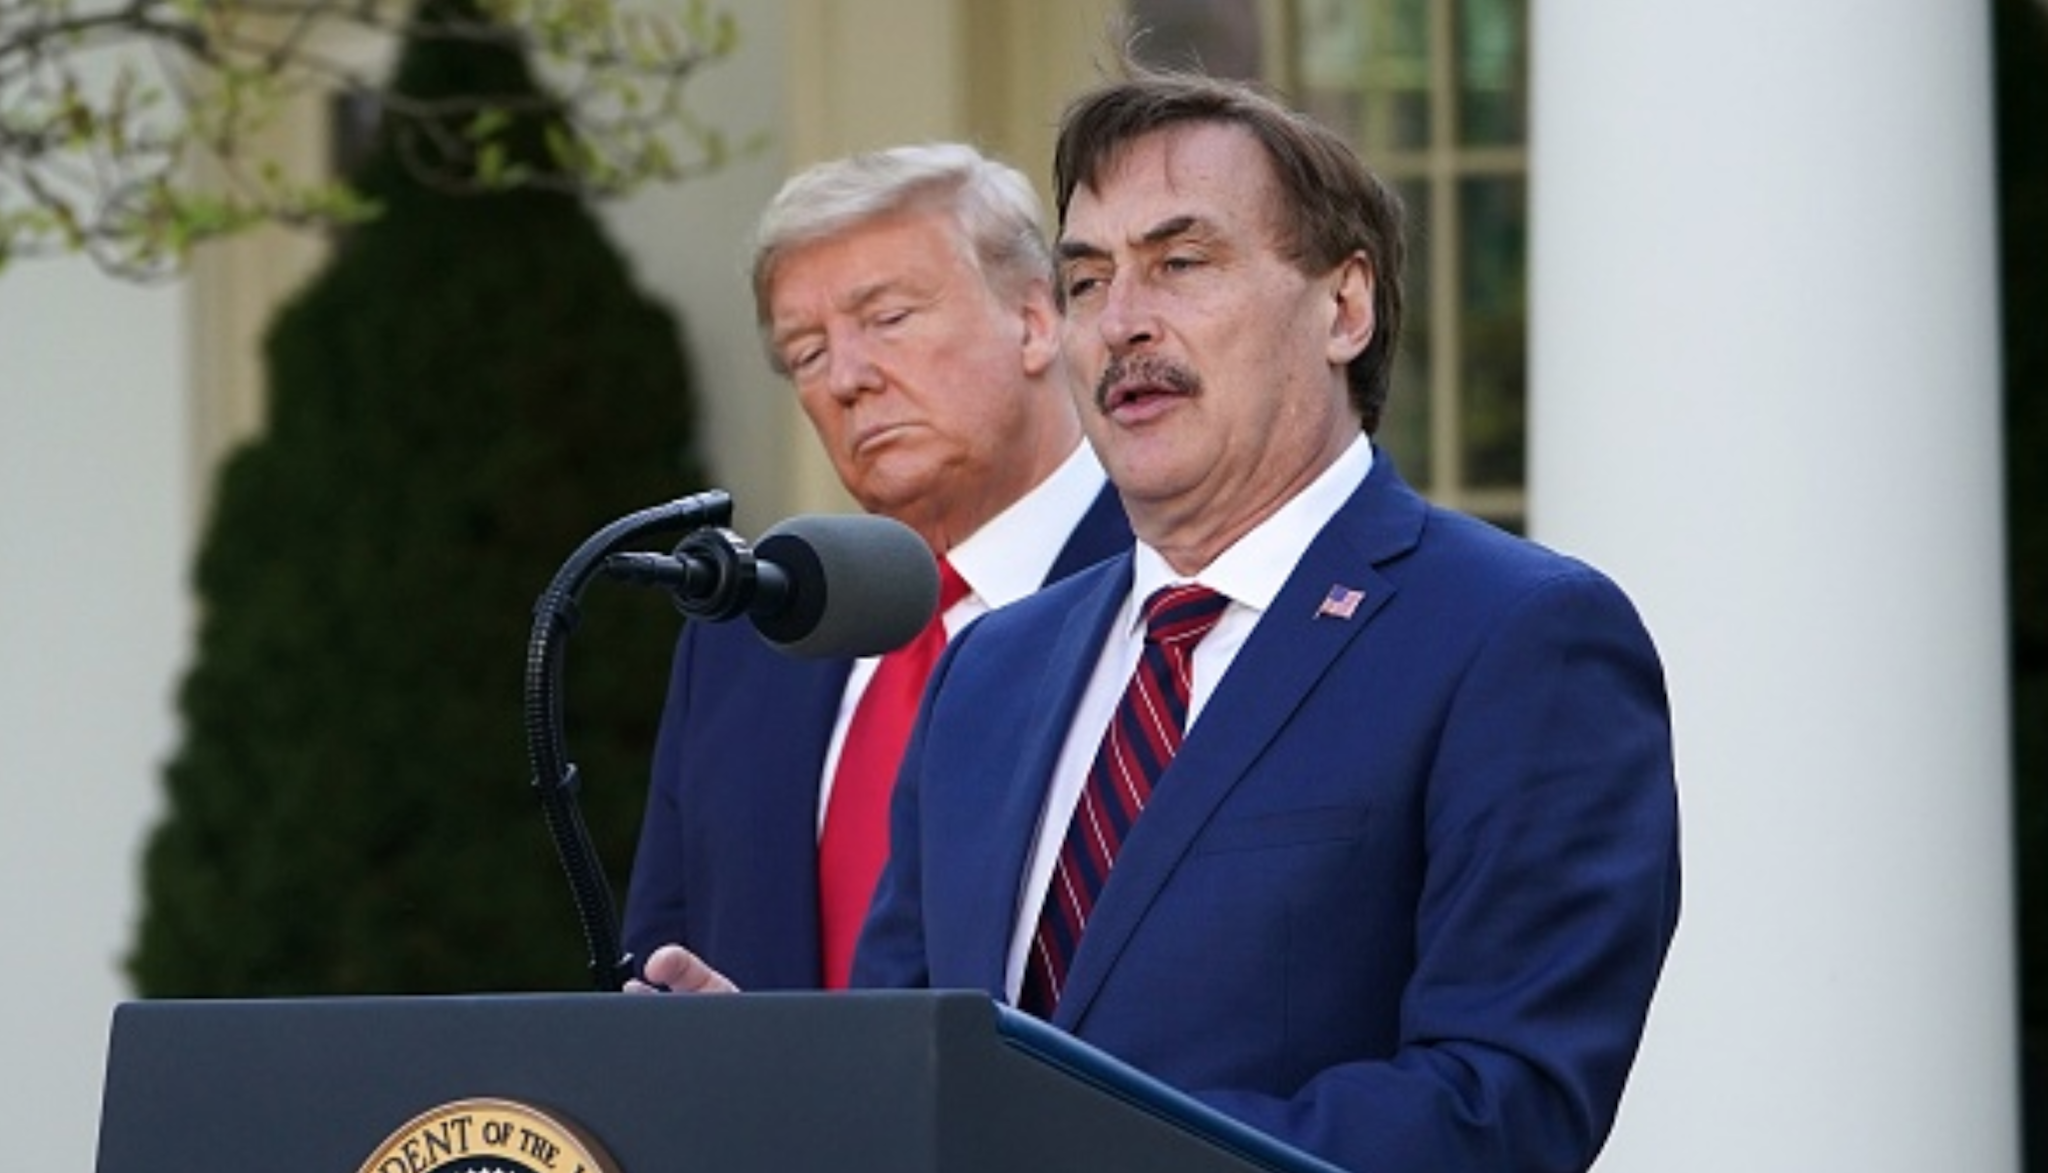 US President Donald Trump listens as Michael J. Lindell, CEO of MyPillow Inc., speaks during the daily briefing on the novel coronavirus, COVID-19, in the Rose Garden of the White House in Washington, DC, on March 30, 2020.